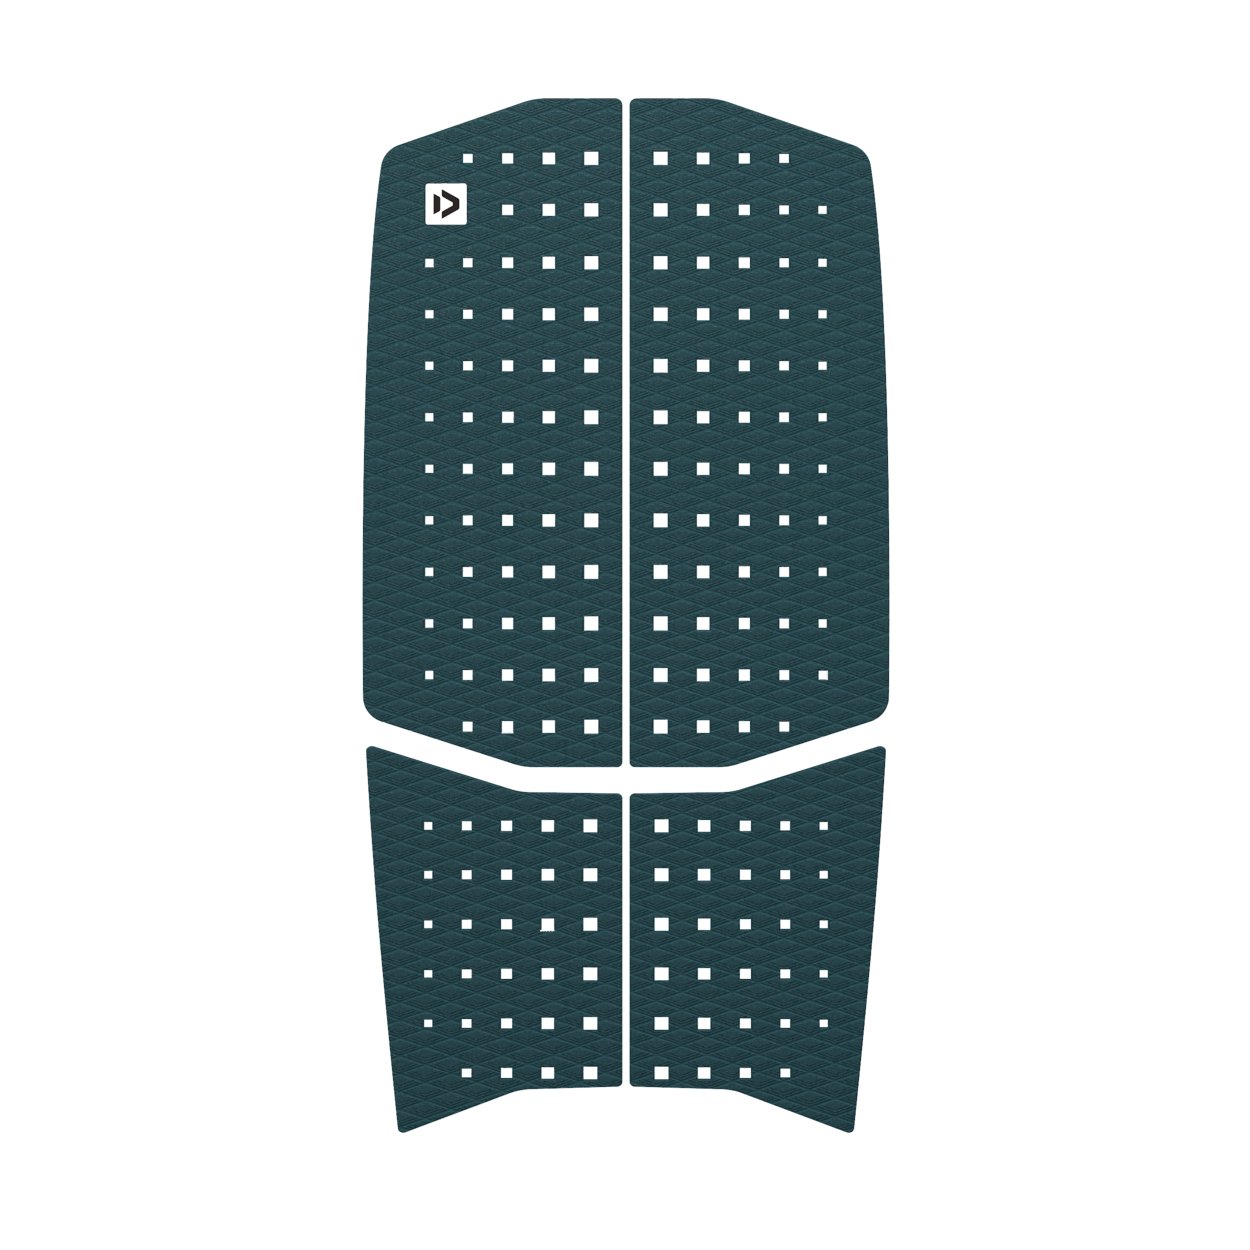 Duotone Traction Pad Pro Front 2023 - Worthing Watersports - 9008415856244 - Surfboards - Duotone Kiteboarding